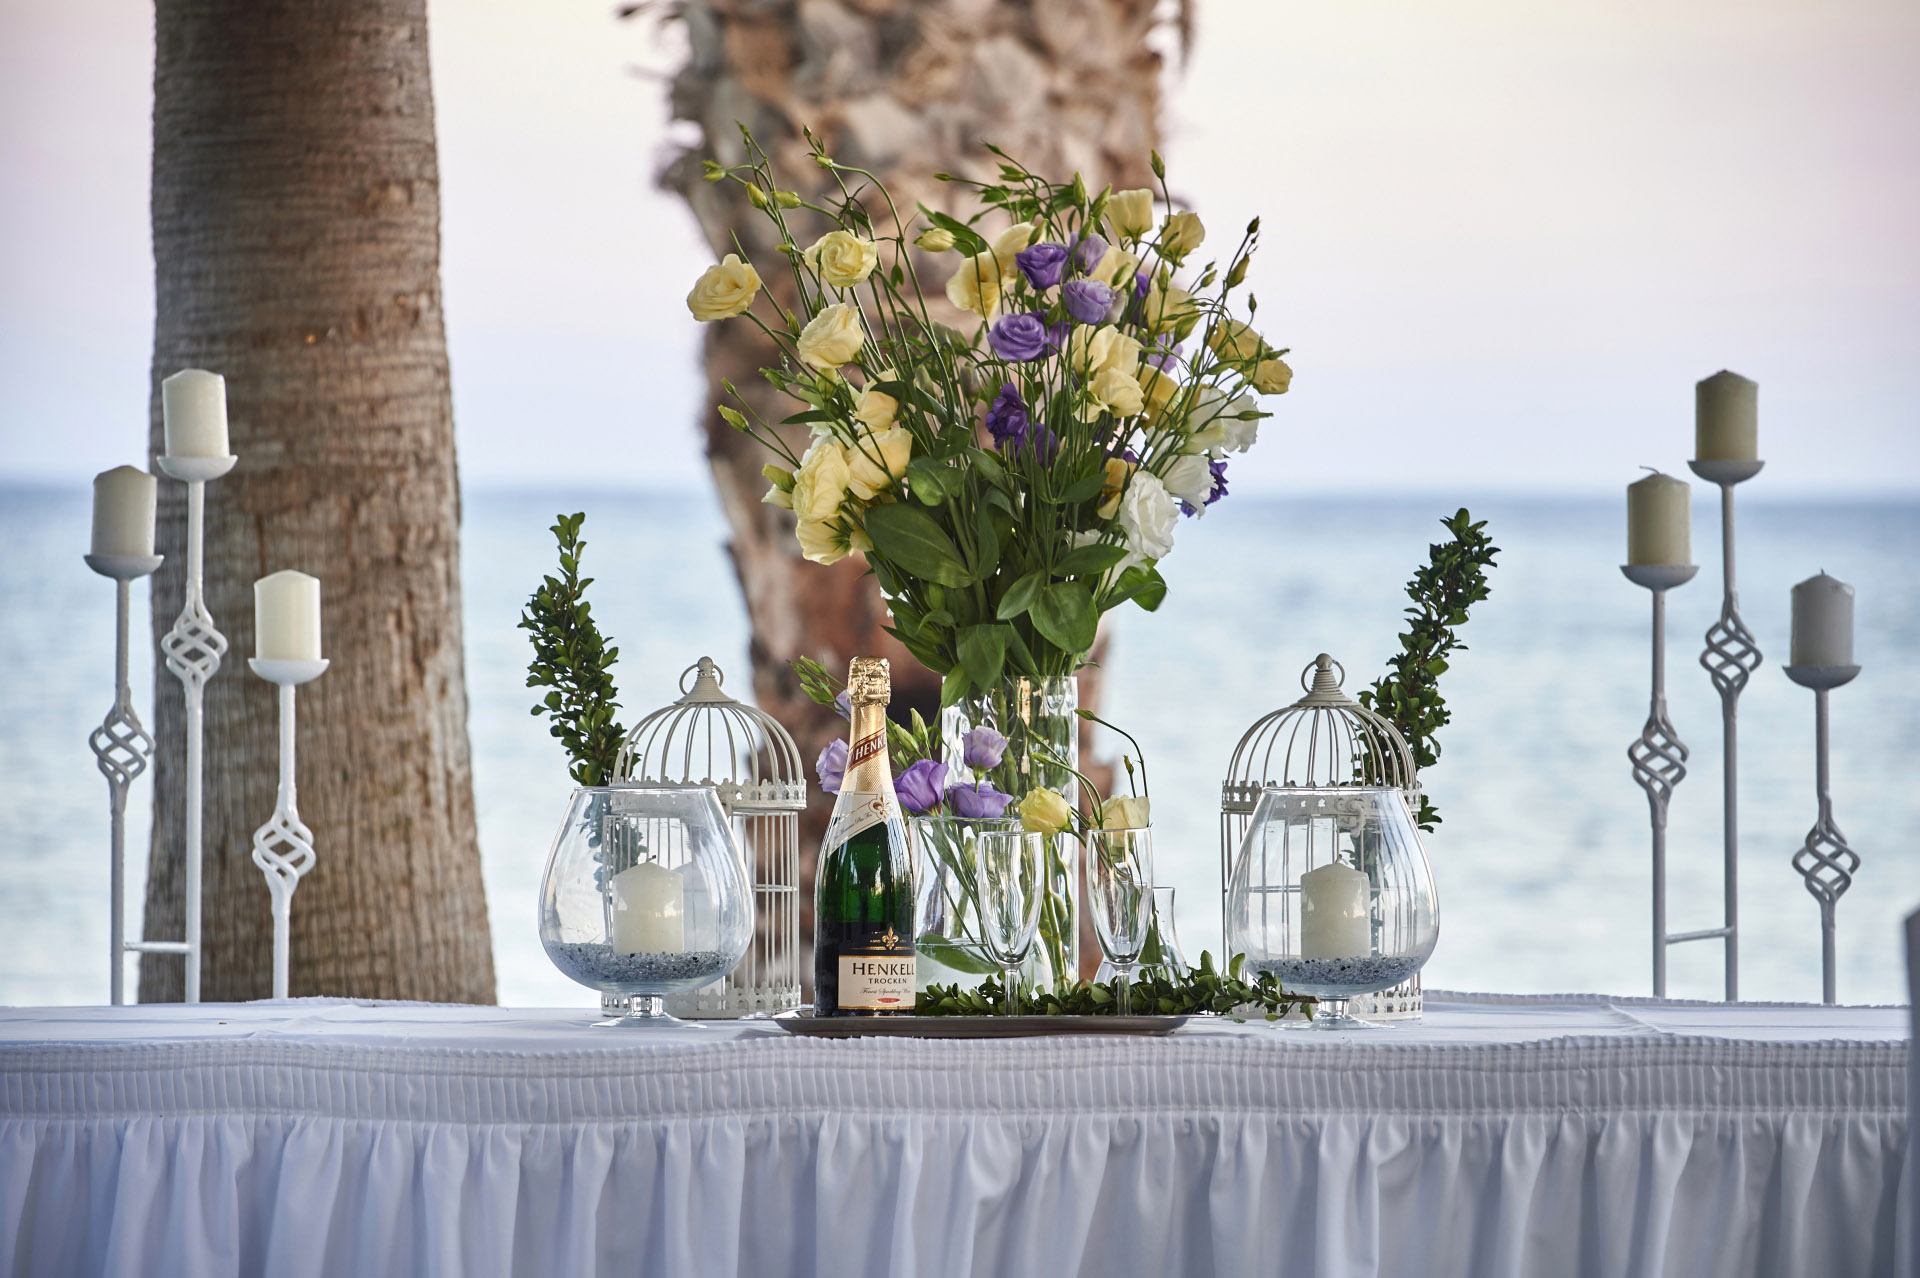 Book your wedding day in Louis Phaethon Beach Hotel Paphos